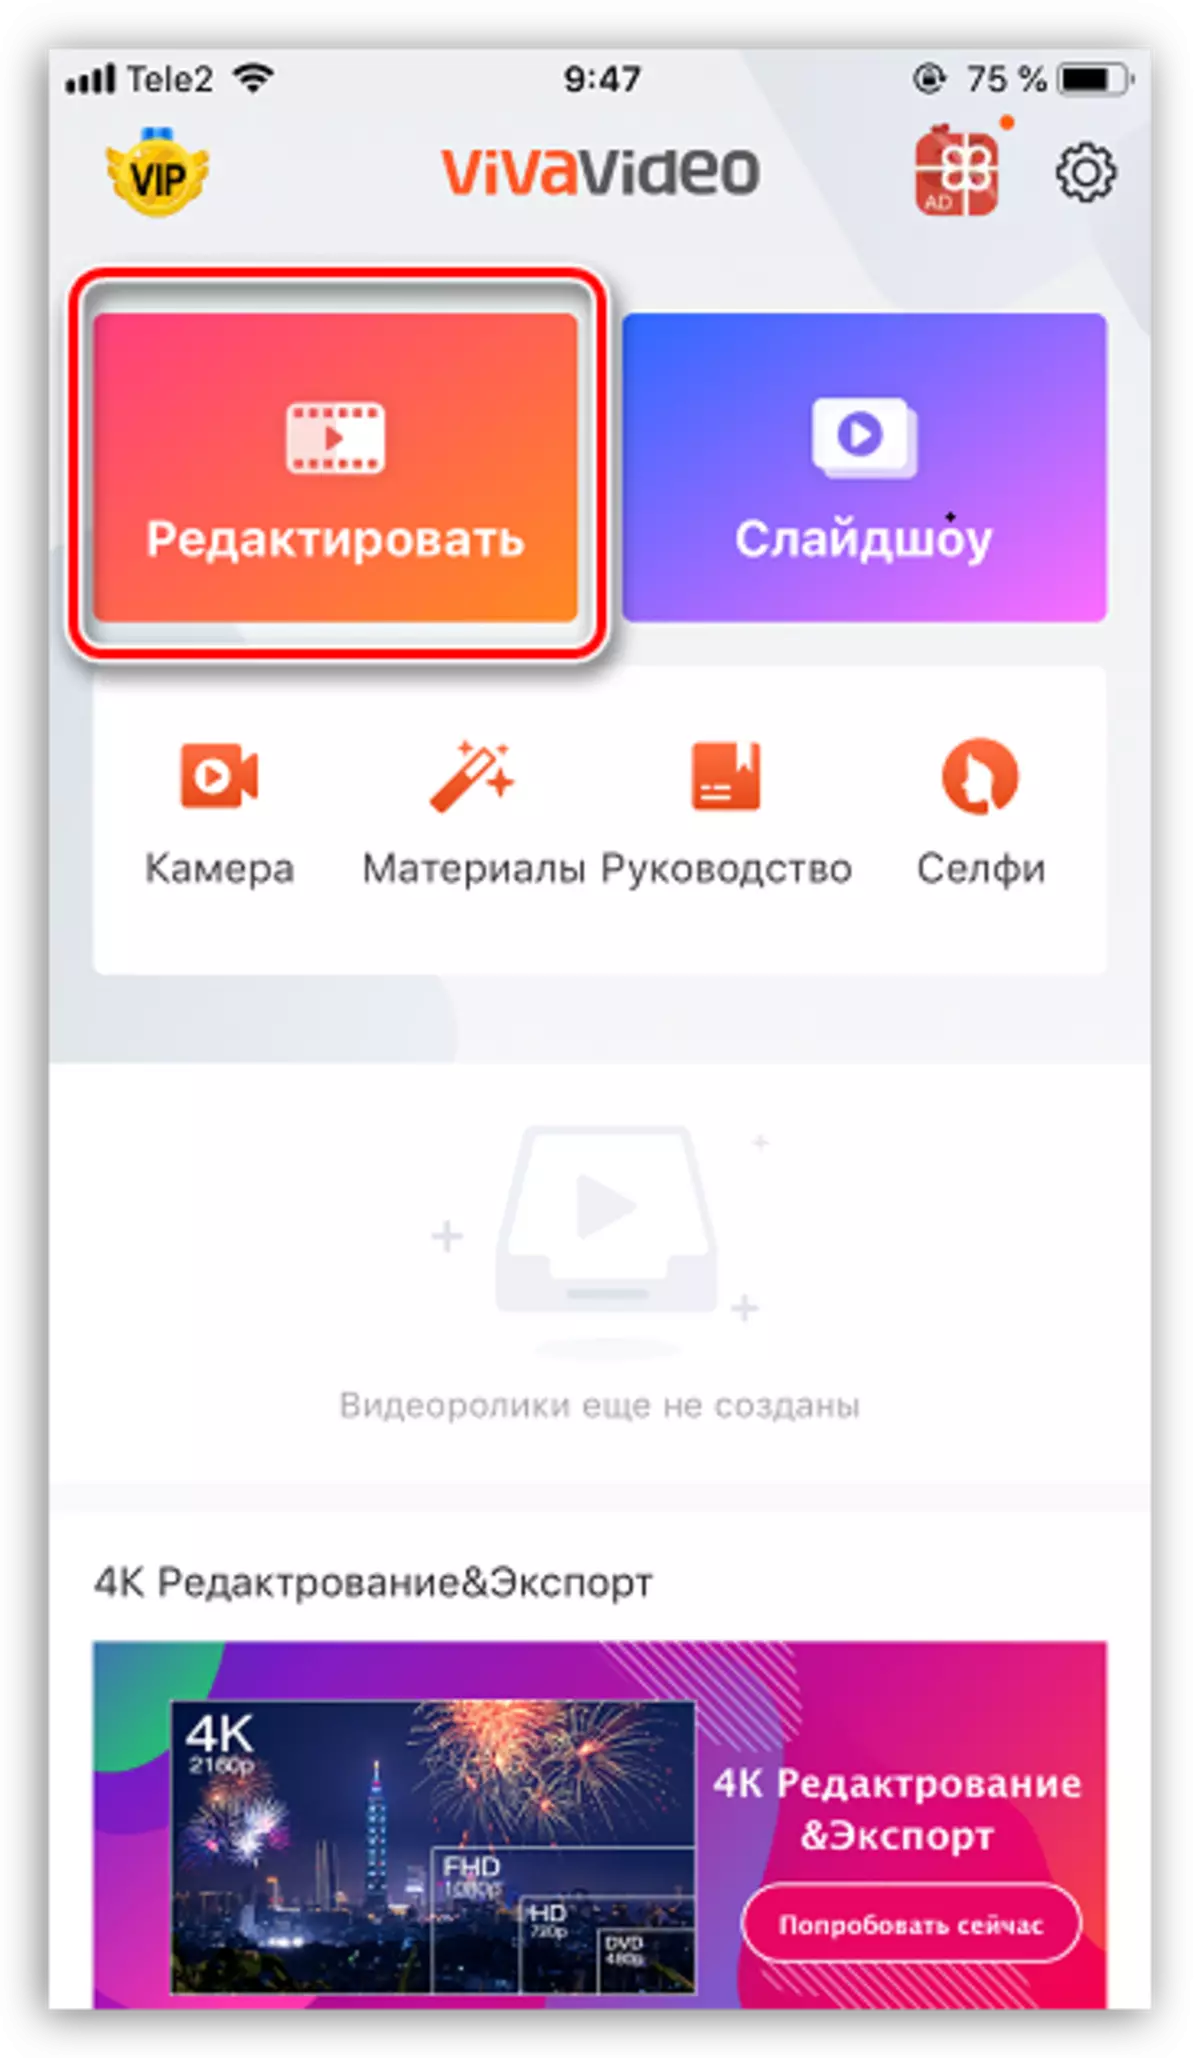 Editing video in Vivavideo application on iPhone